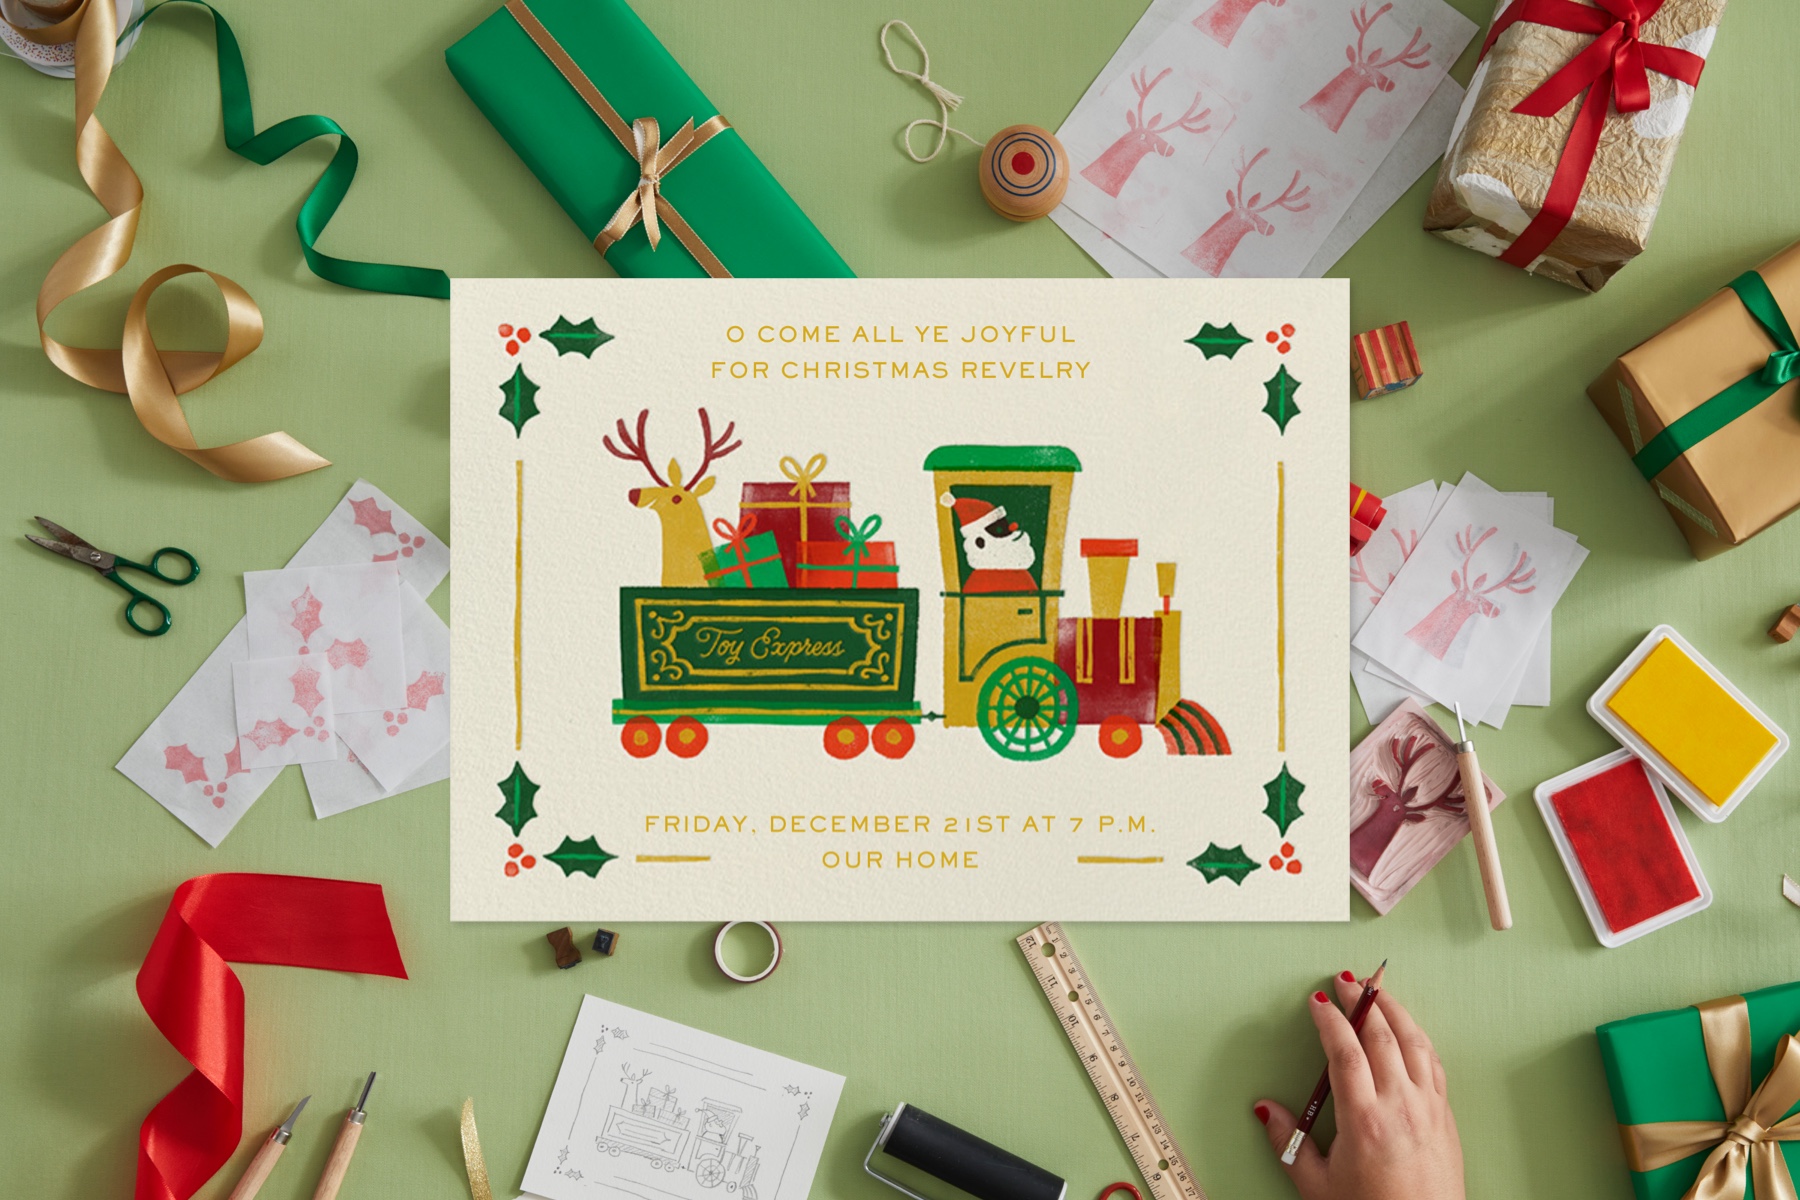 An invitation featuring Santa in a train pulling presents and a reindeer. The card is surrounded by items that inspired the artist, like ribbon, rubber stamps, and presents.